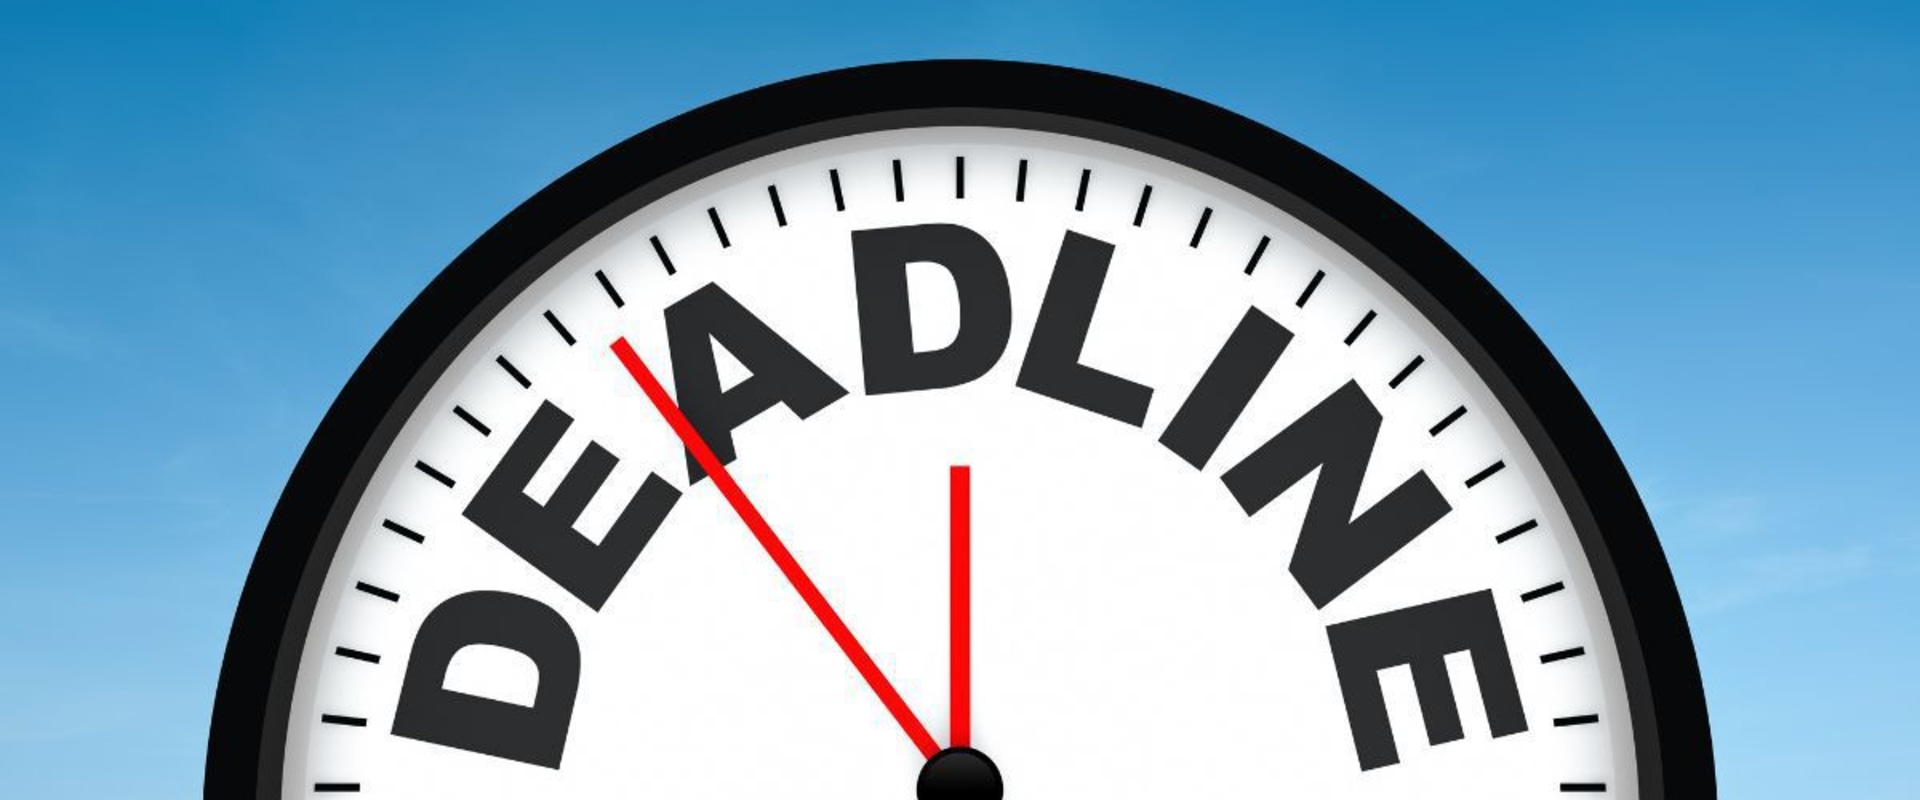 The Importance of Meeting Deadlines When Filing Documents with the Court